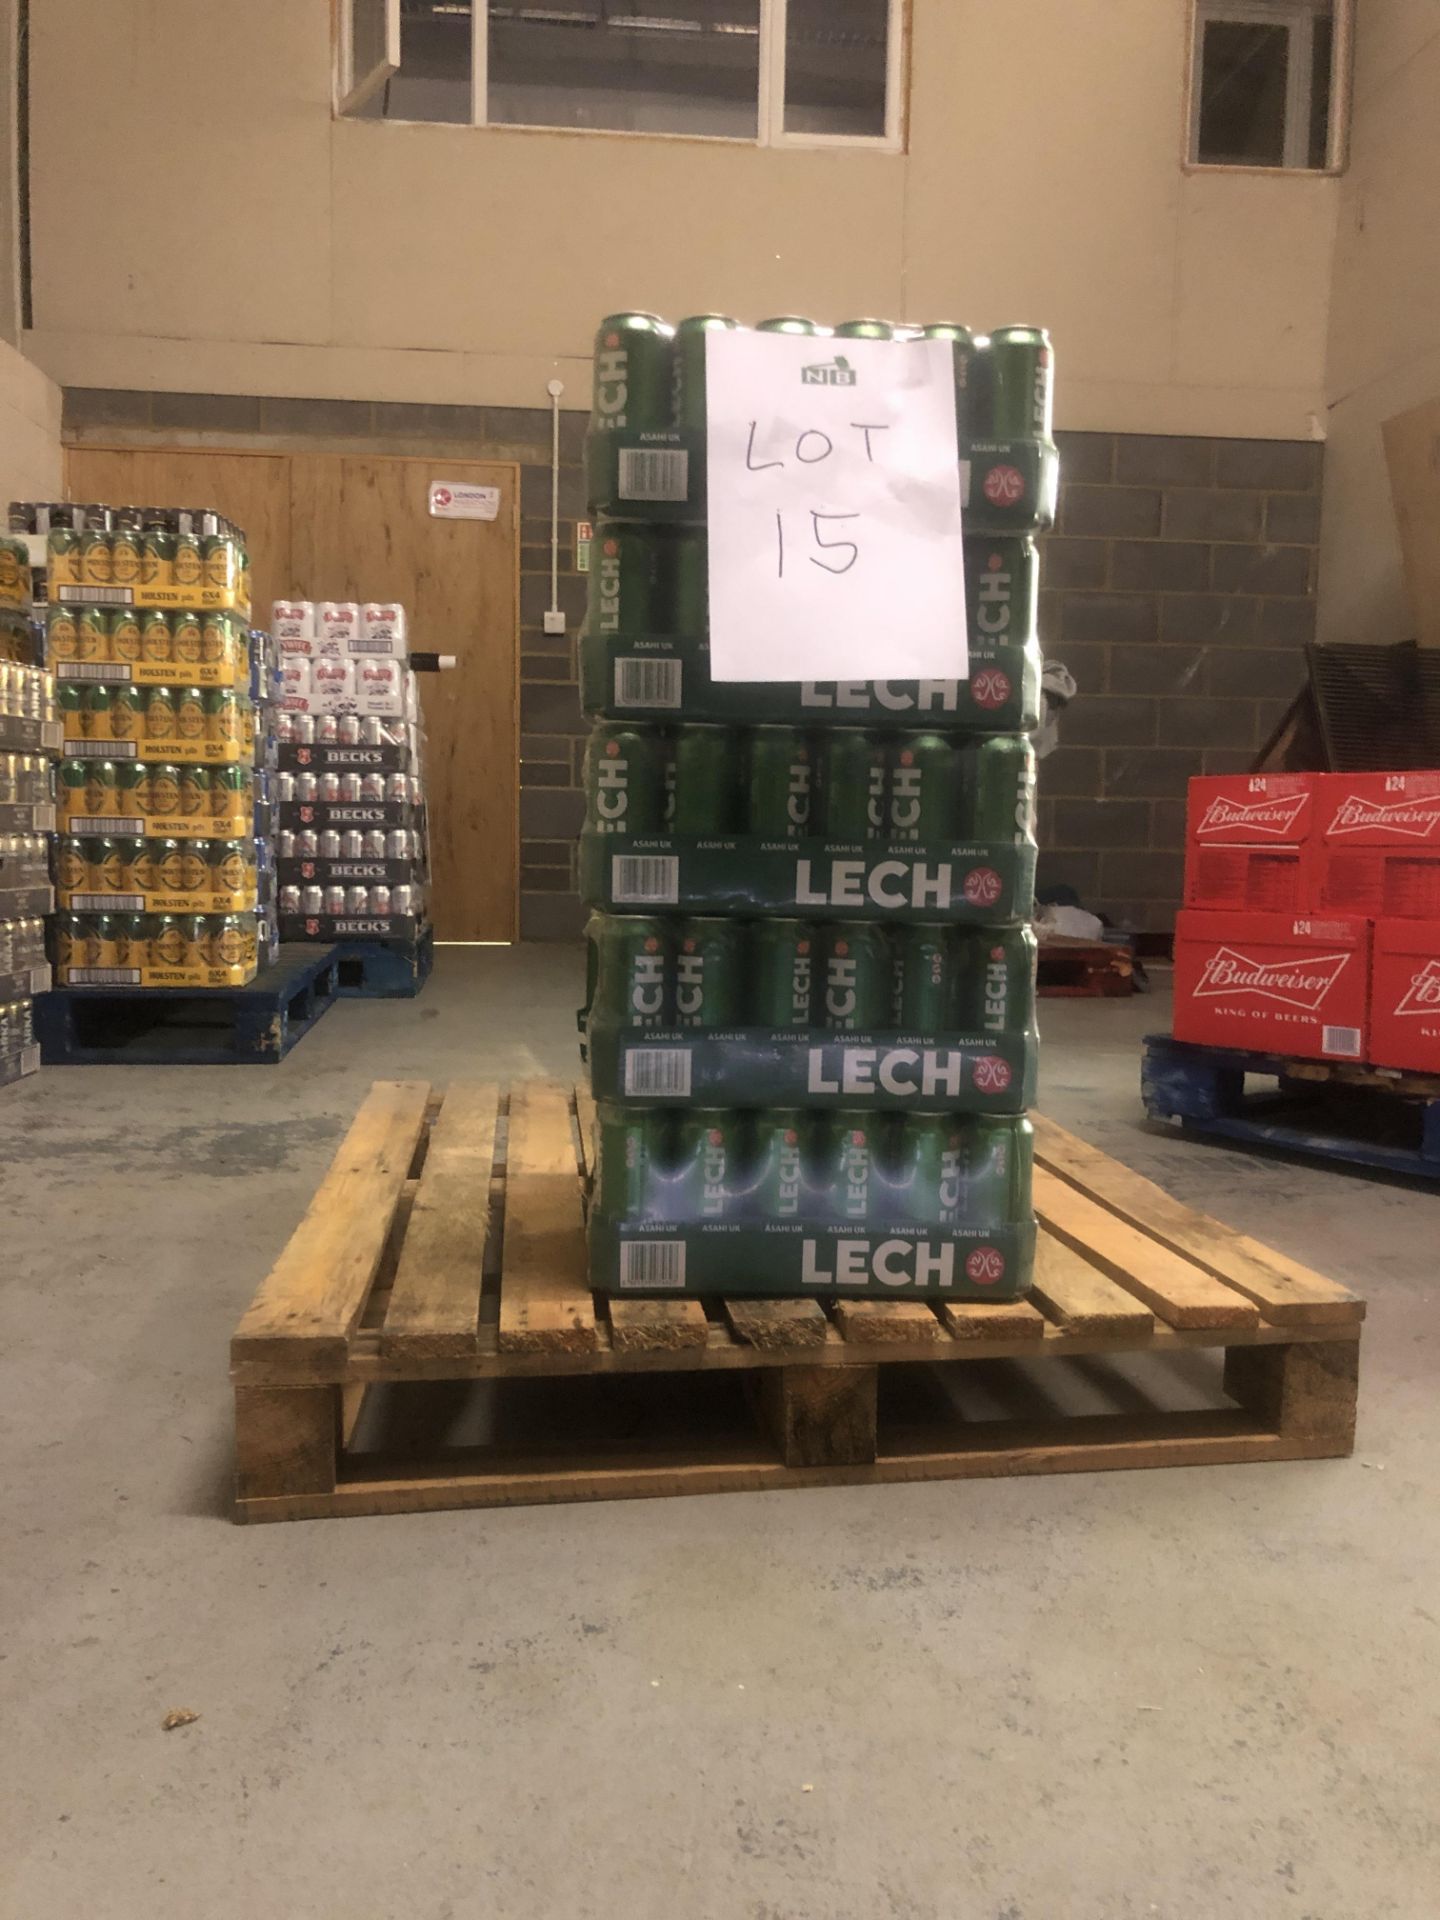 Lech Premium Lager - (5 x cases of 24 x 500ml) Total RRP £137